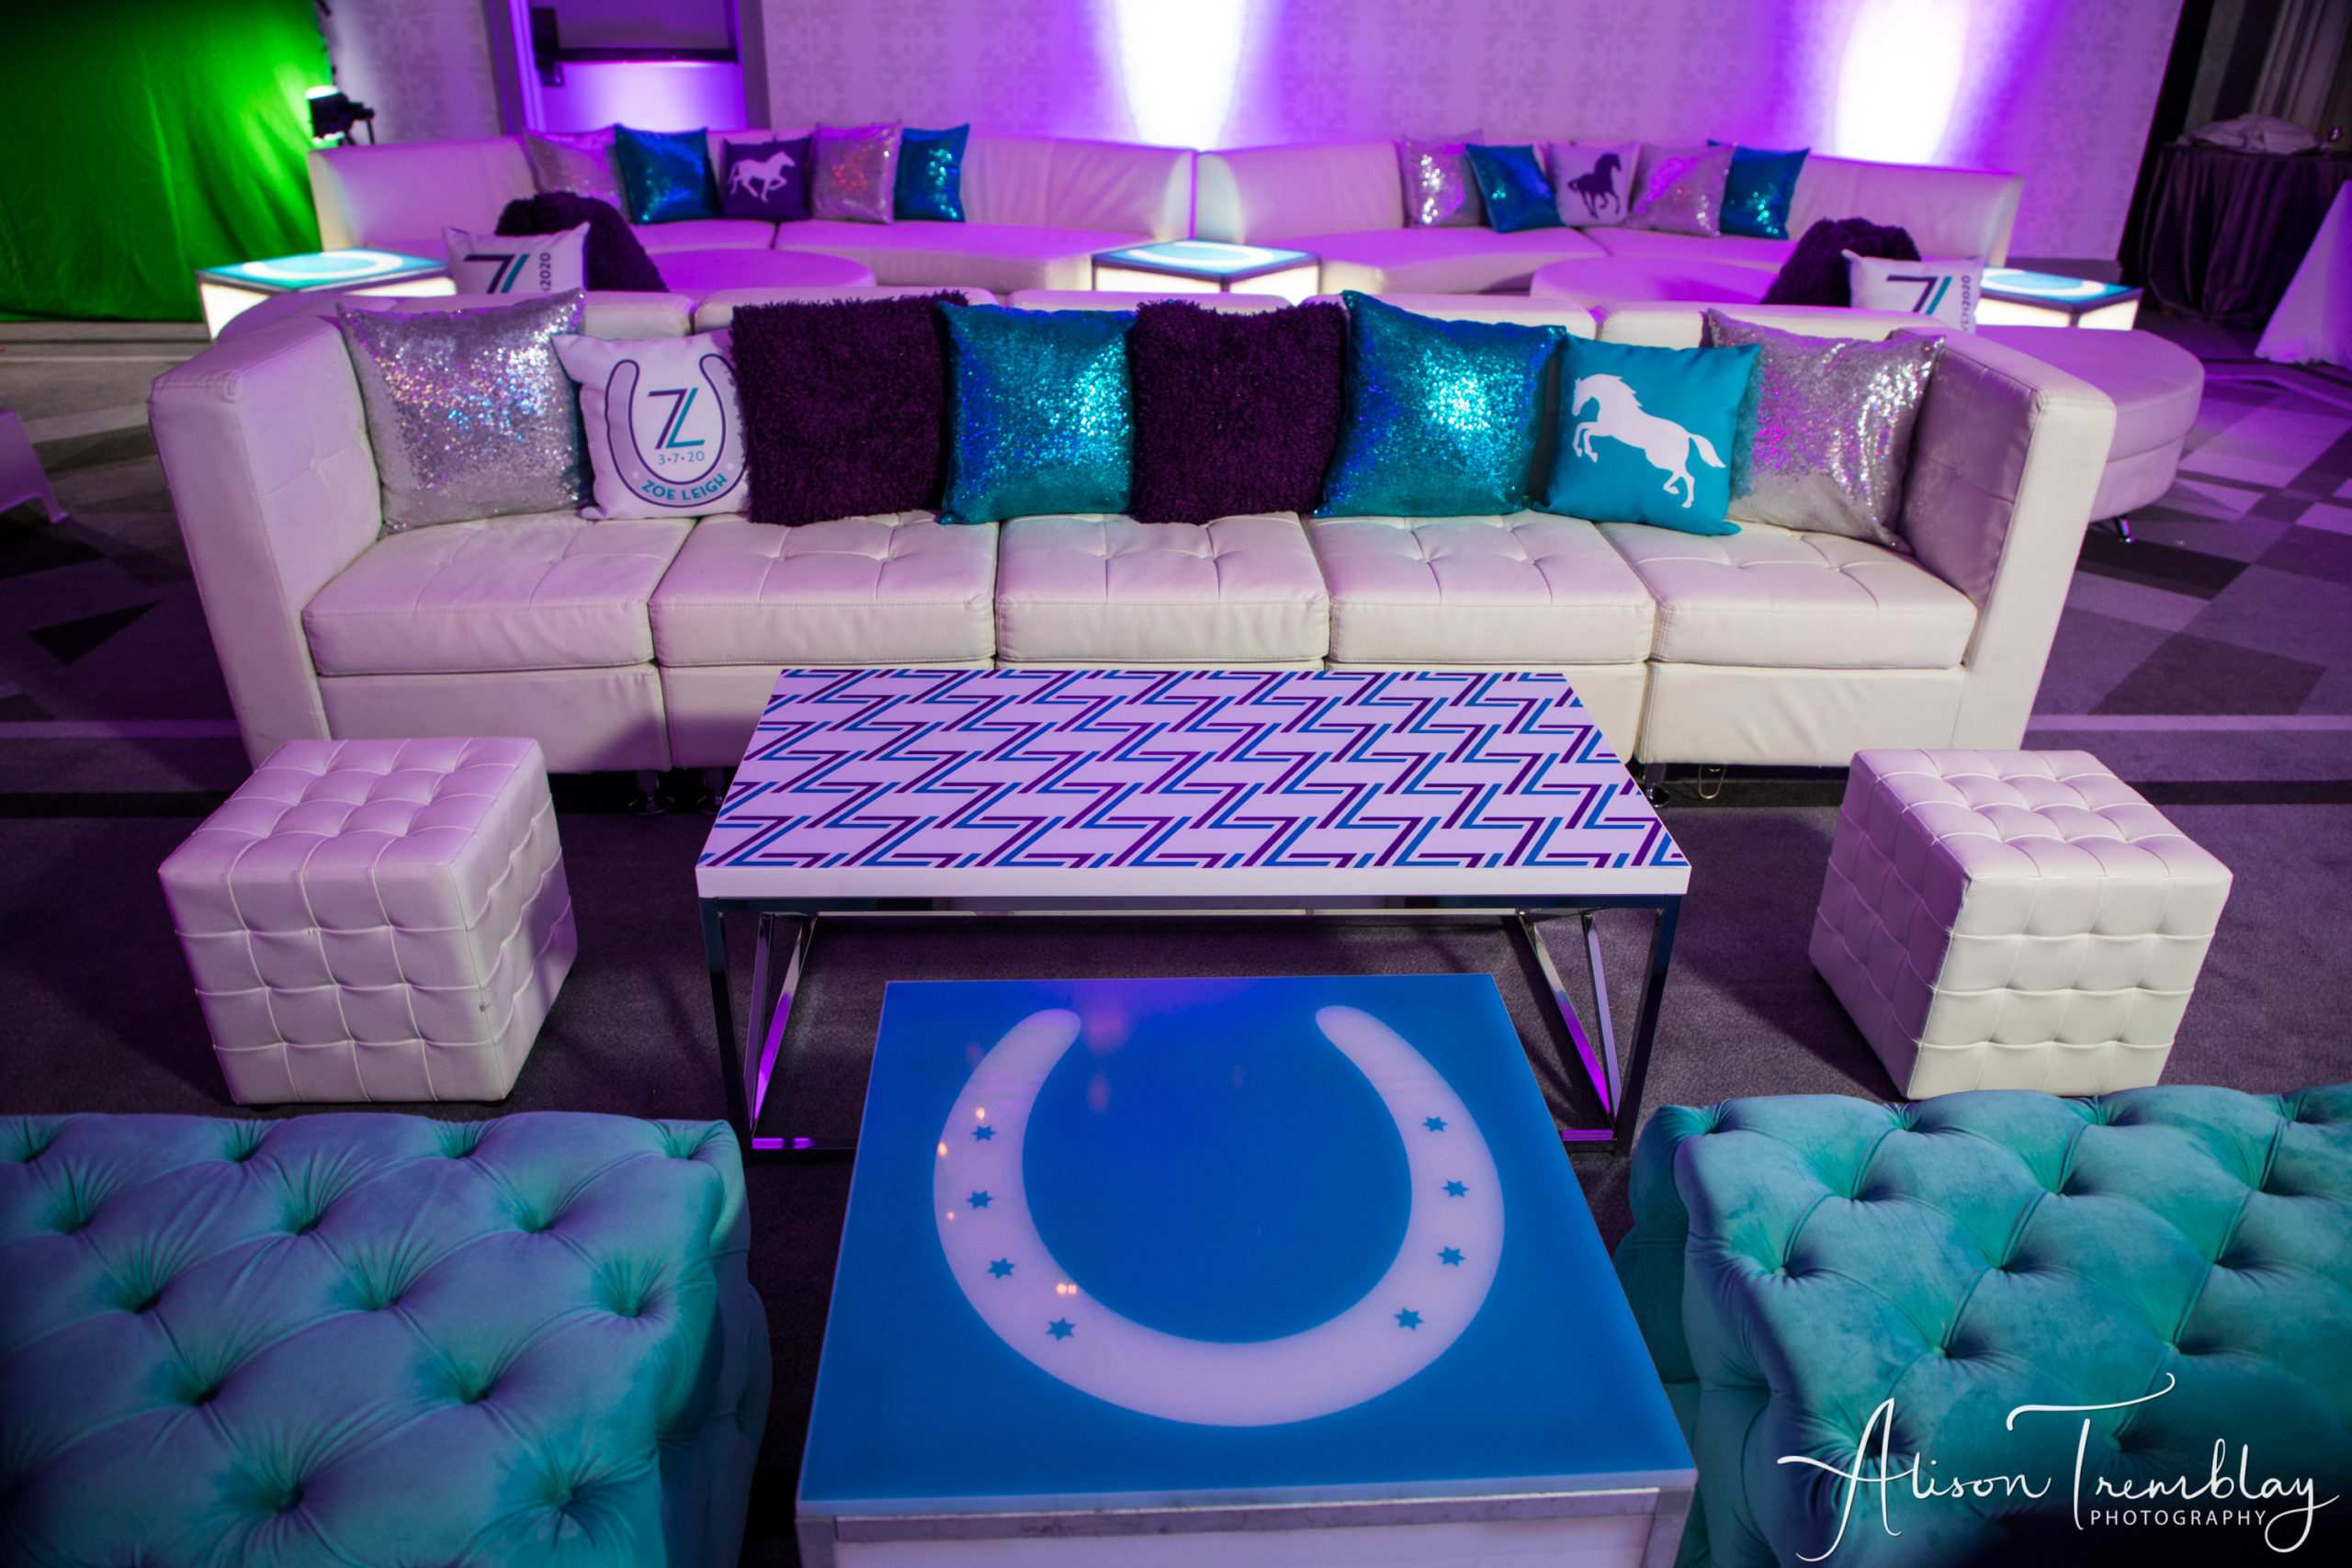 Lounge at Zoe's Purple and Teal Equestrian Bat Mitzvah at Canopy by Hilton Washington DC Bethesda North | Pop Color Events | Adding a Pop of Color to Bar & Bat Mitzvahs in DC, MD & VA | Photo by: Alison Tremblay Photography